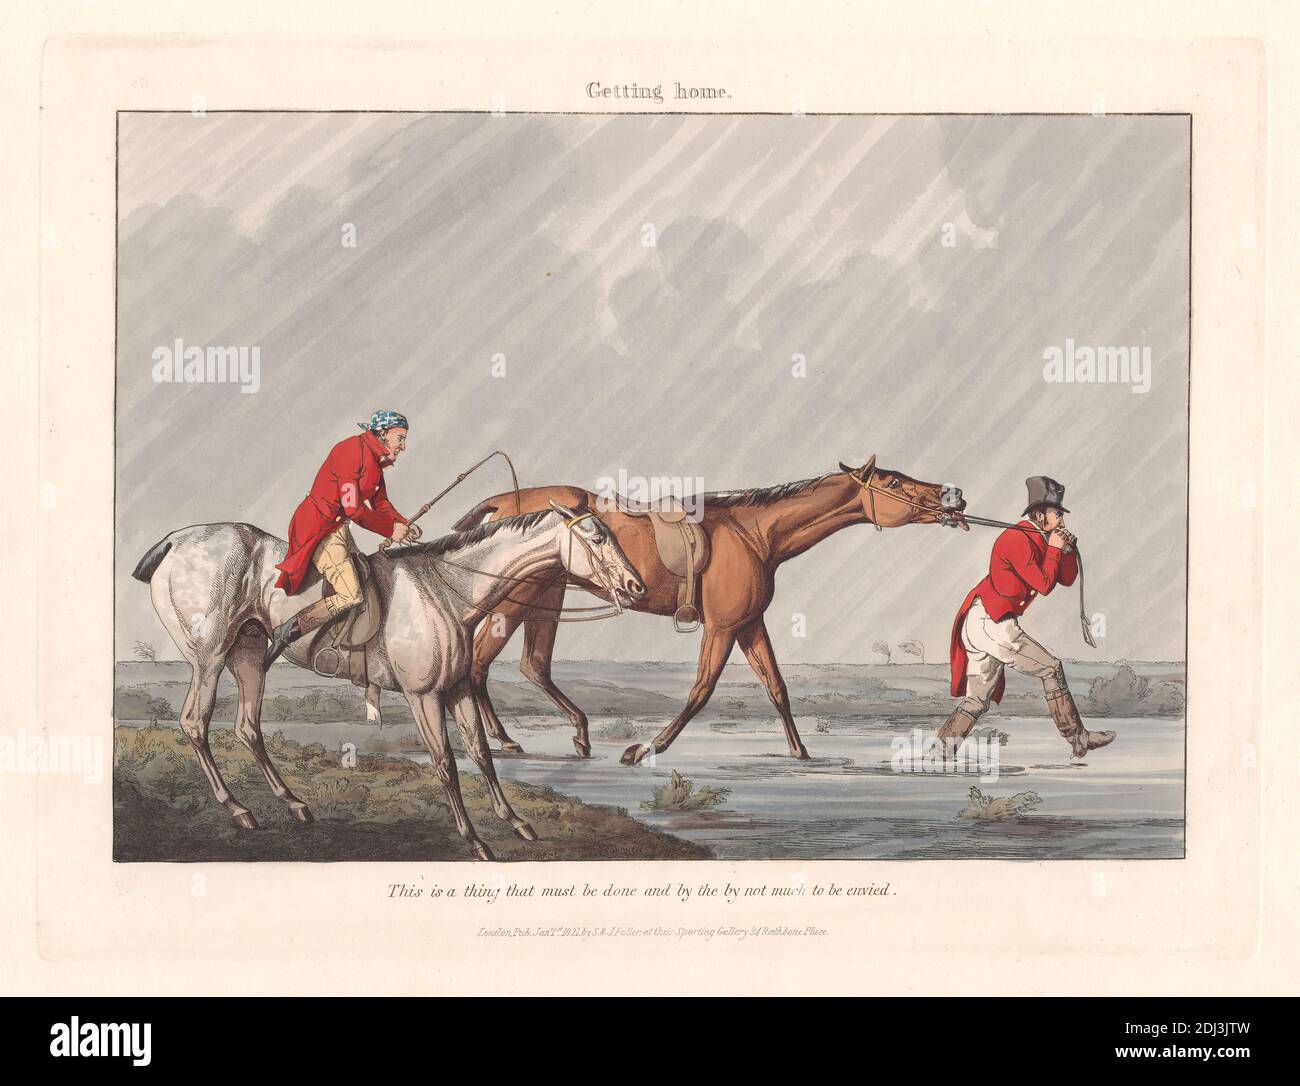 Fox-hunting Some Do and Some Don't: It is All a Notion. Getting Home., Henry Thomas Alken, 1785–1851, British, 1820, Hand colored etching, Sheet: 8 3/4 x 11 13/16in. (22.2 x 30cm Stock Photo